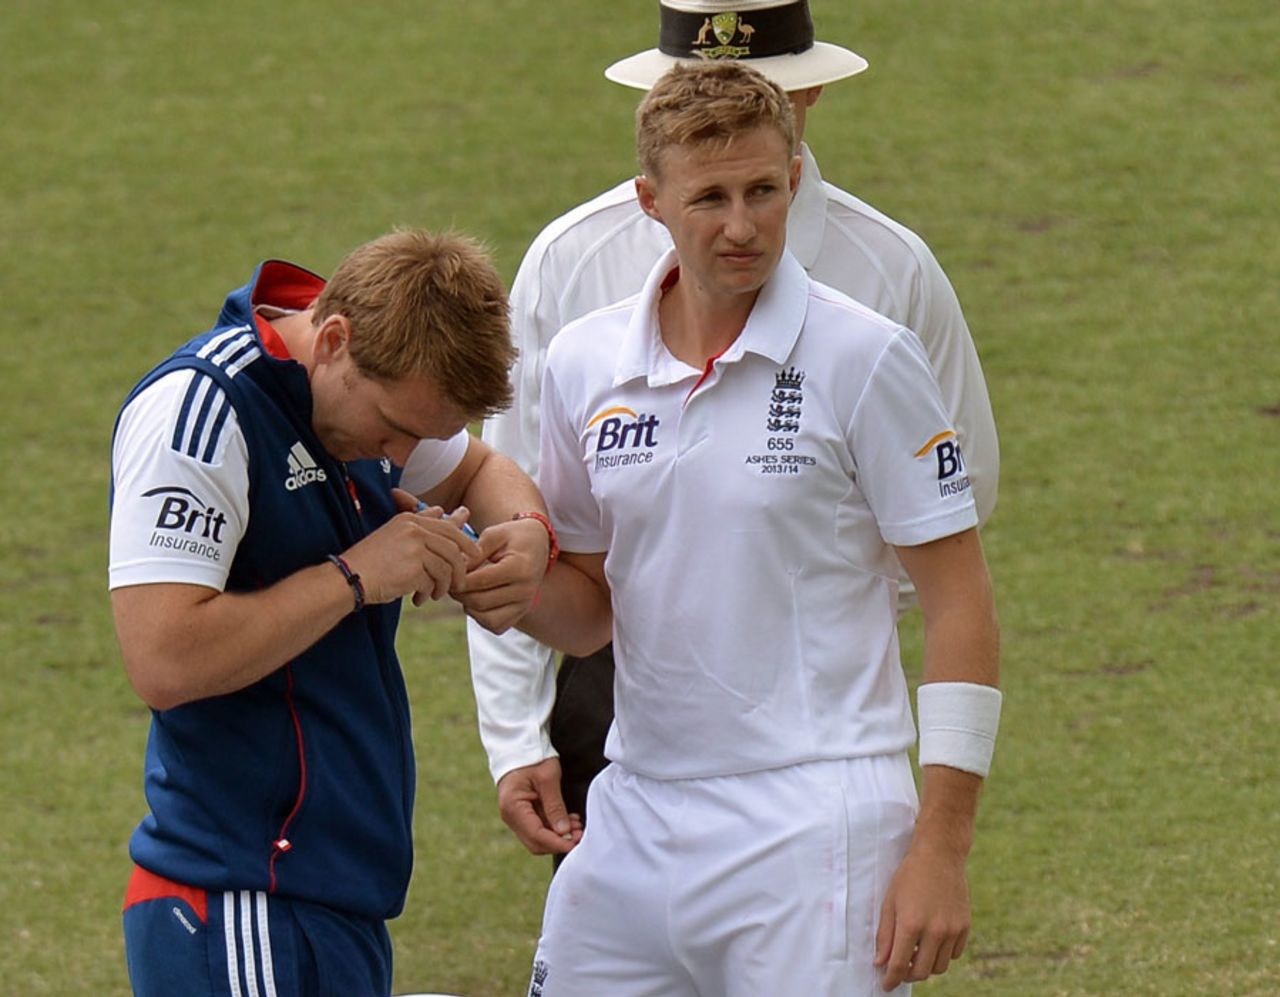 Joe Root required treatment after being hit on the finger, Cricket Australia Invitational XI v England, Sydney, 3rd day, November 15, 2013